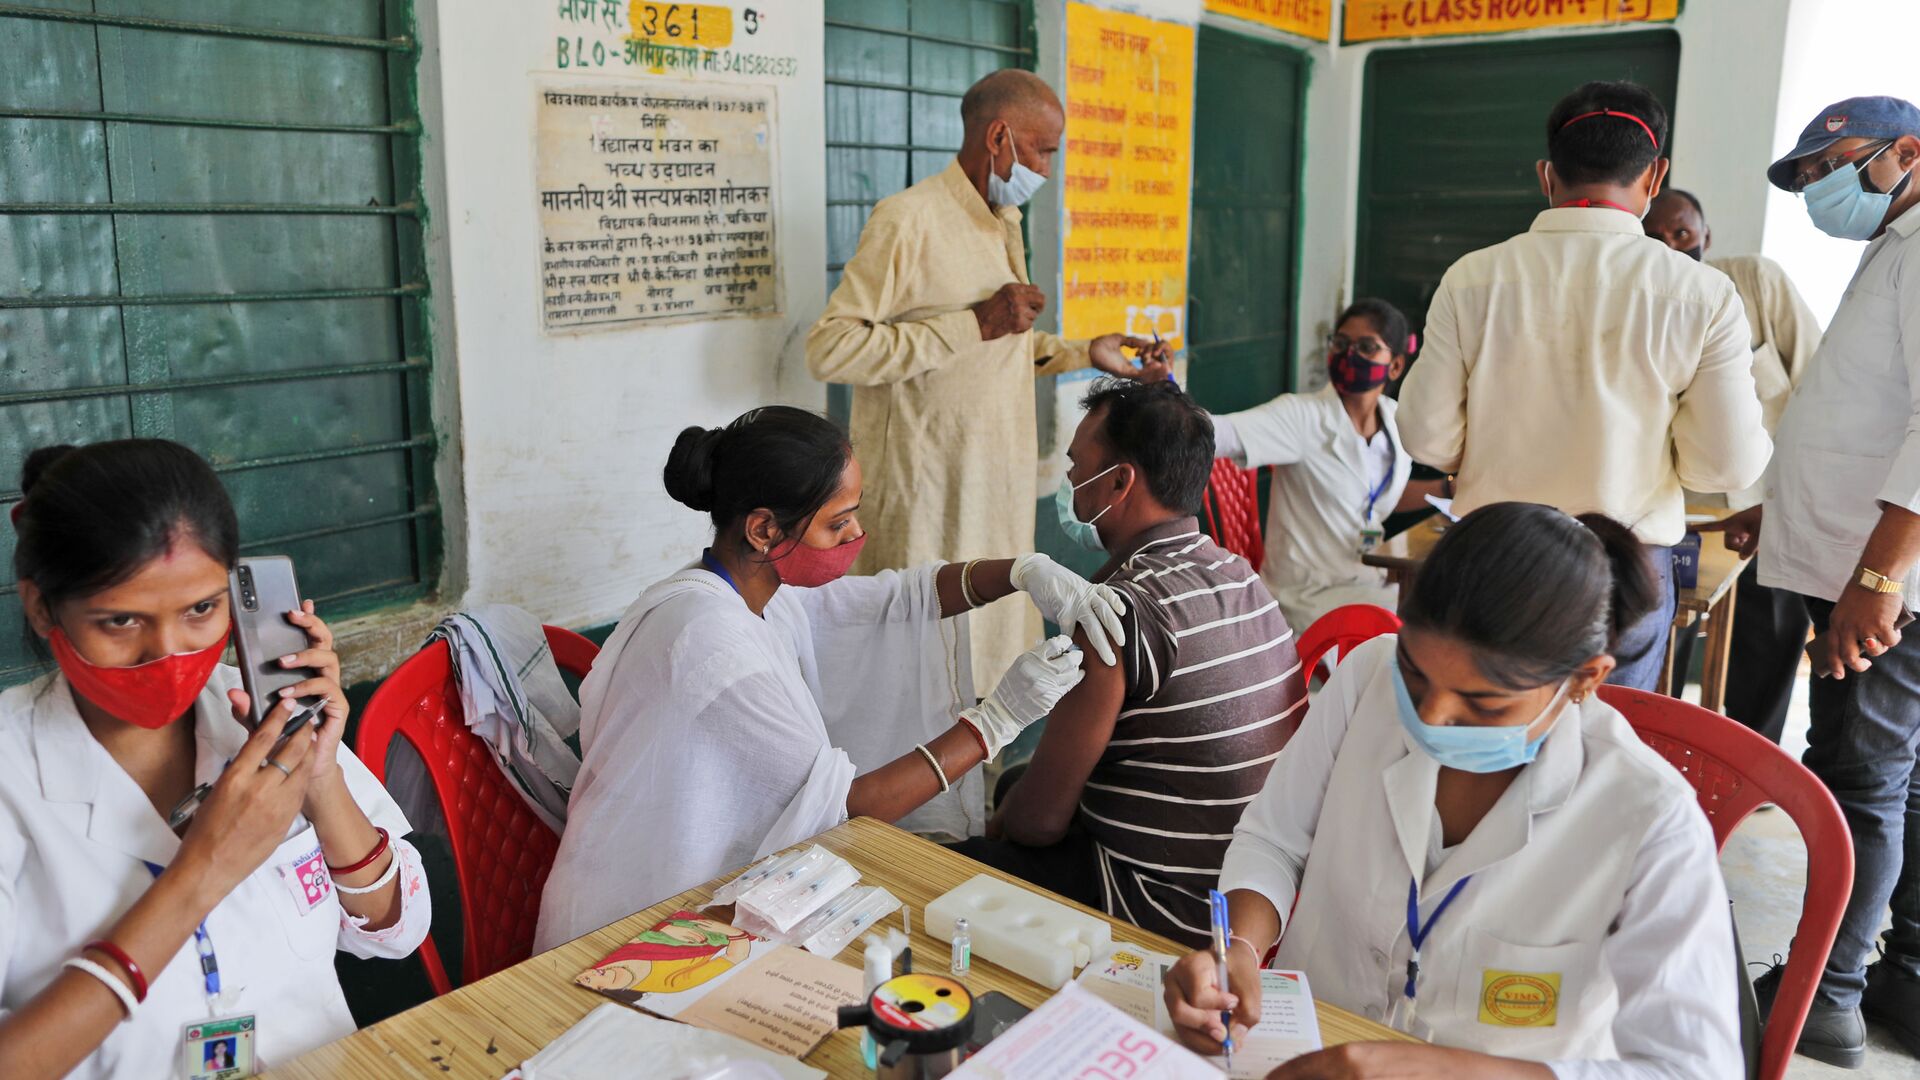 A vaccination drive against COVID-19 is in progress at a government school in Amritpur village, in Chandauli district, Uttar Pradesh state, India, Thursday, June 10, 2021 - Sputnik International, 1920, 09.07.2021